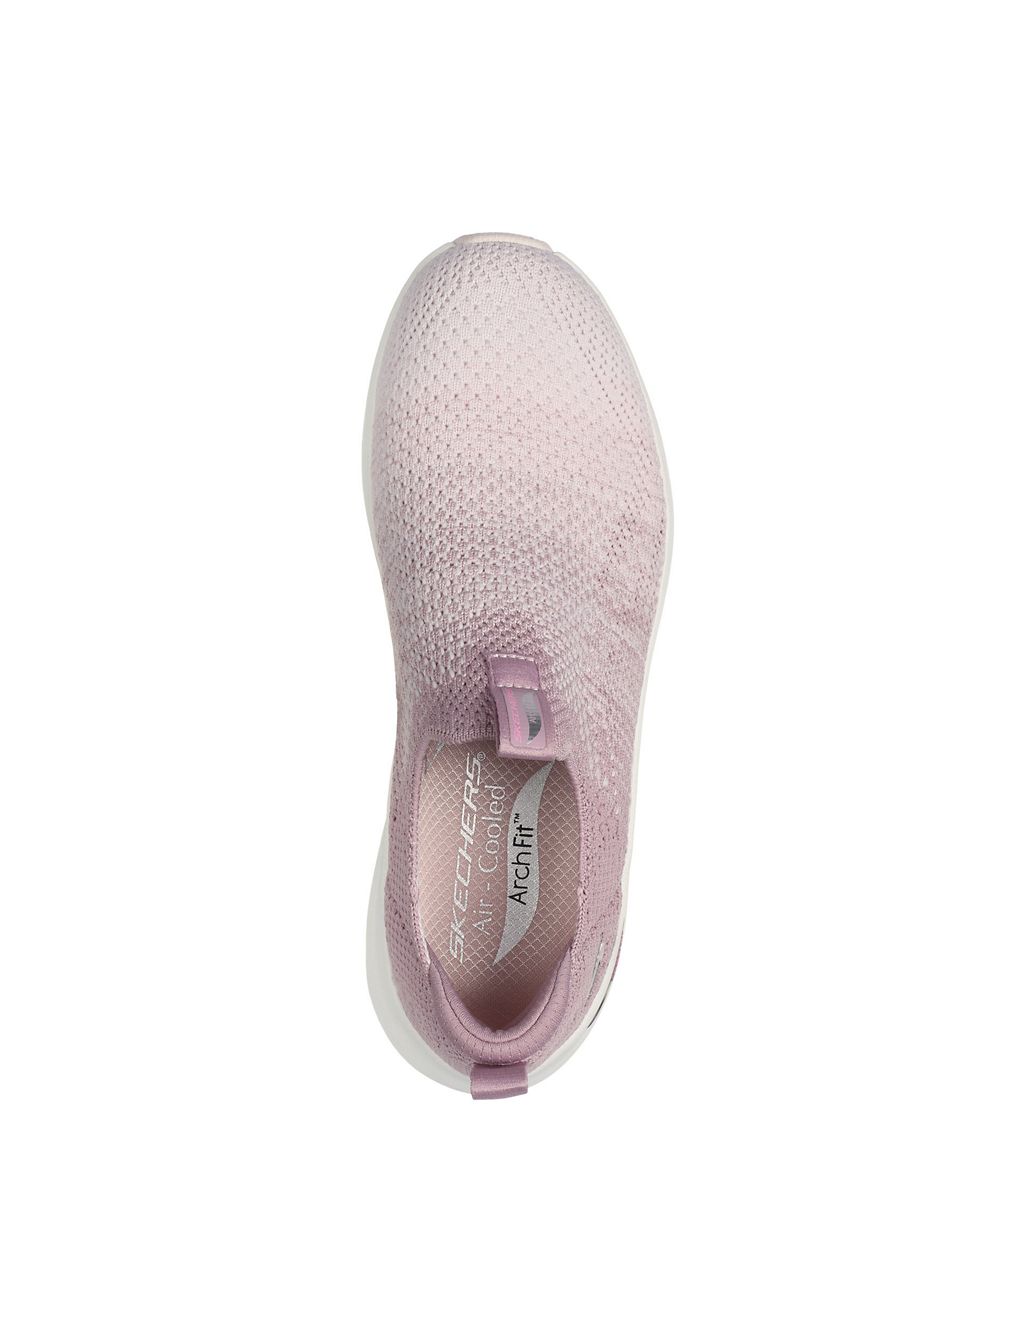 Arch Fit 2.0 Slip On Trainers 4 of 5